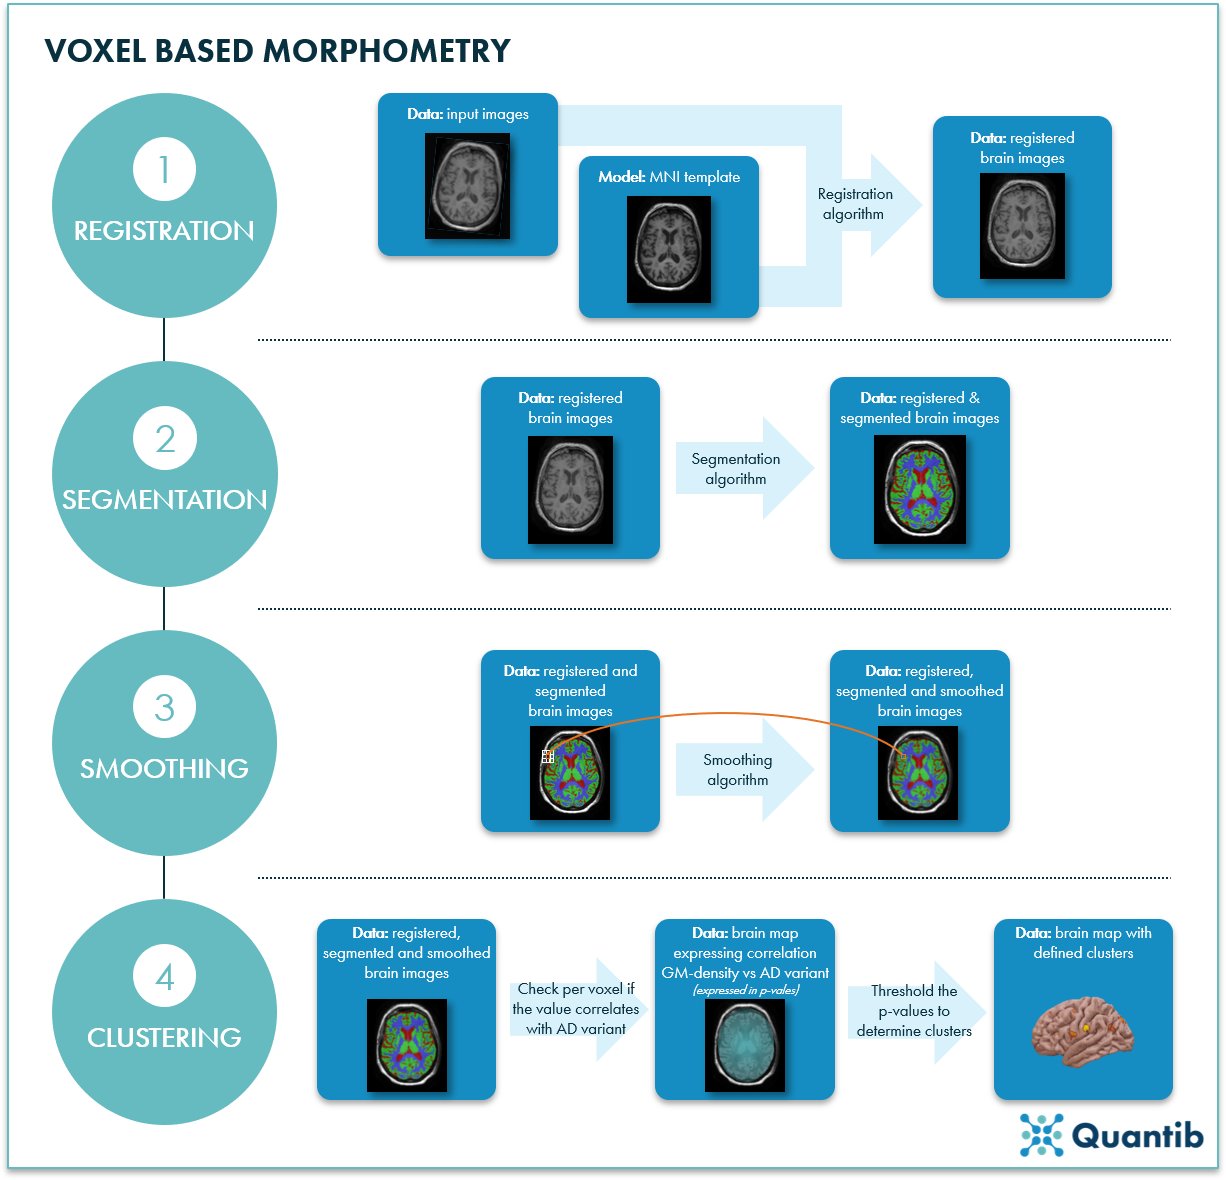 Schematic overview of how to apply voxel based morphometry to MRI brain scans